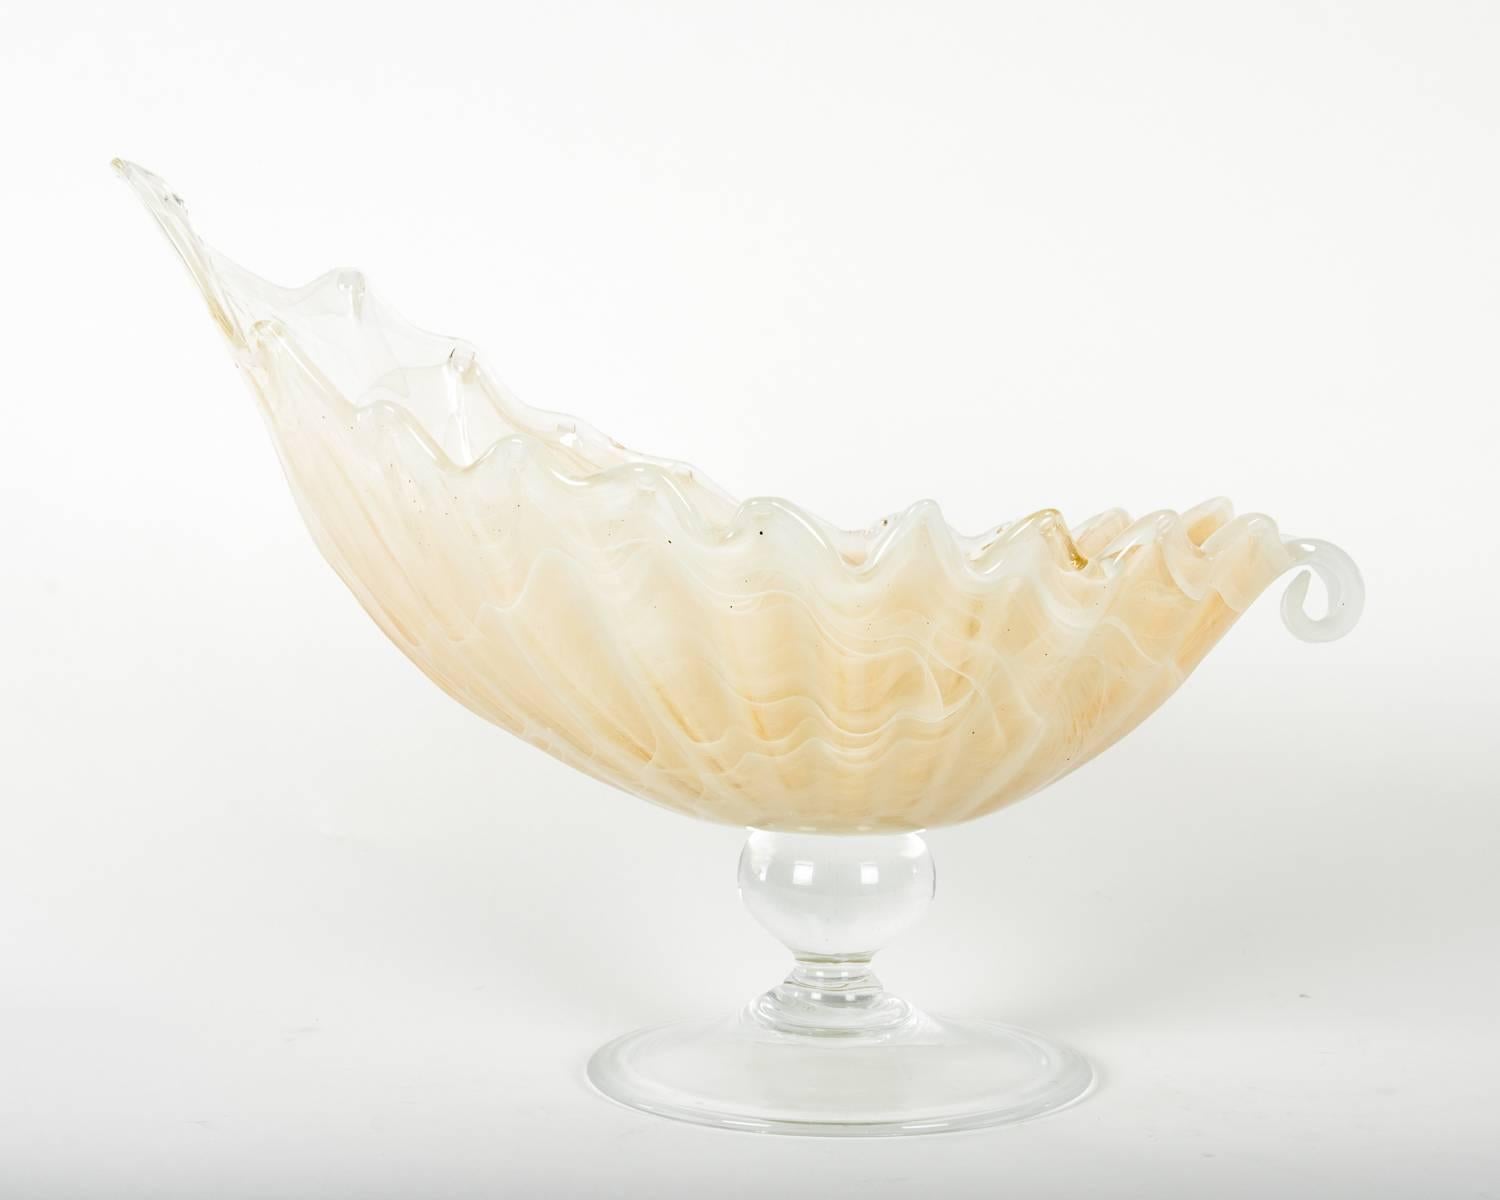 Very large shell form vintage handblown Murano gold tone footed centerpiece, with clear glass stem and foot.